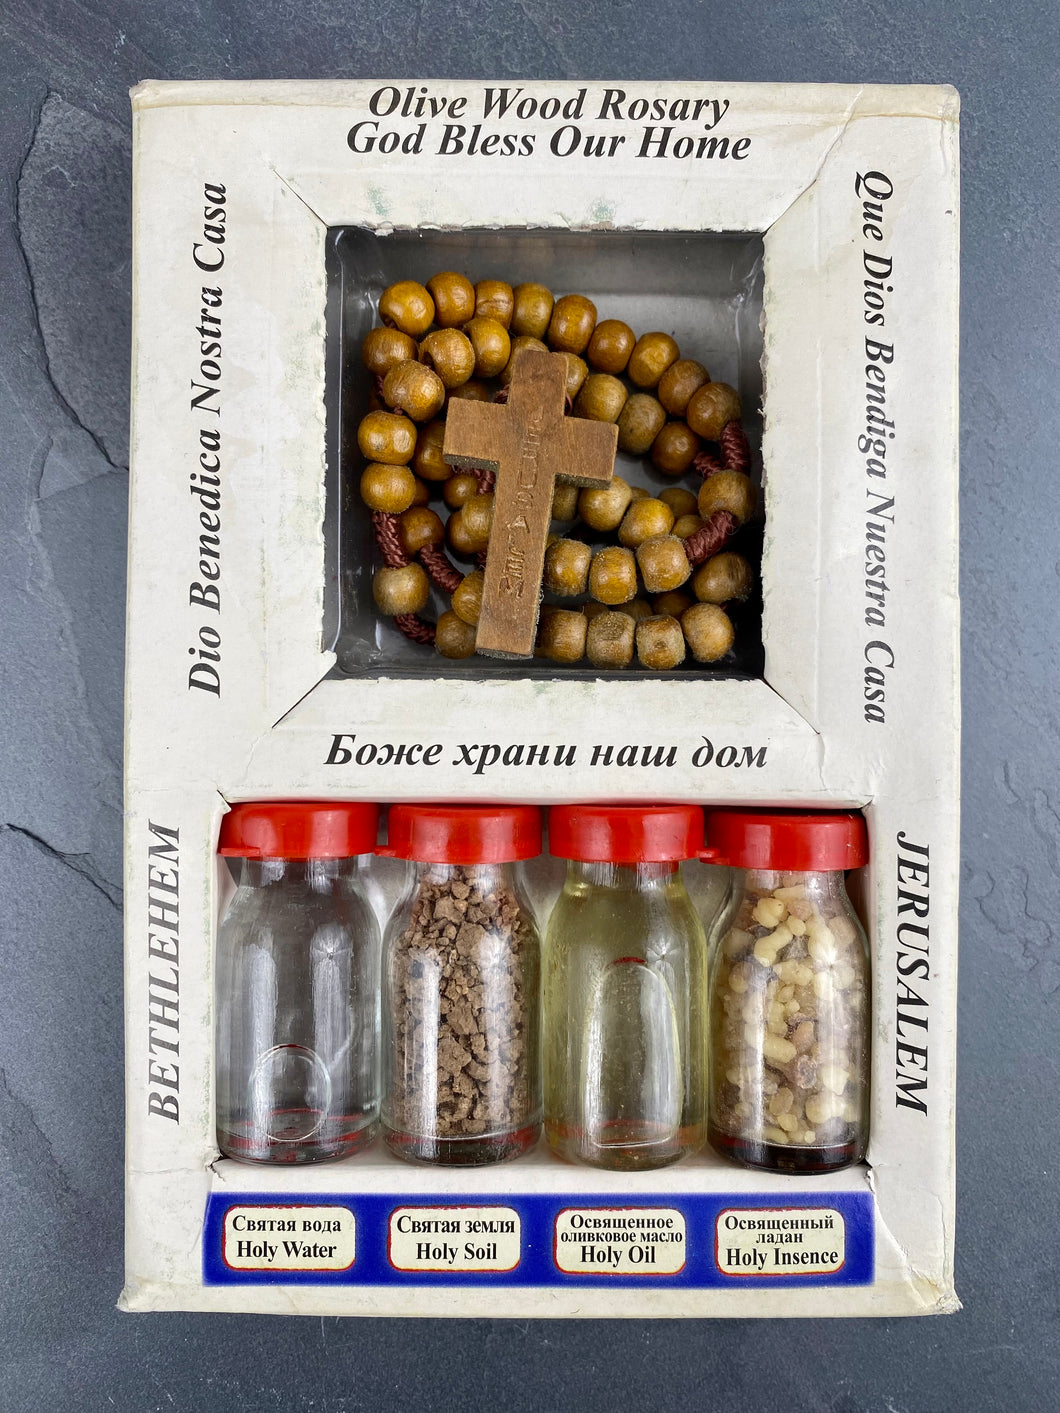 This Holy Box Set from Jerusalem contains Pure Water from the Jordan River, Genuine Earth From Jerusalem, Holy Olive Oil from Bethlehem, Incense and Olive Wood Rosary Cross from the Holy Land. HB20221